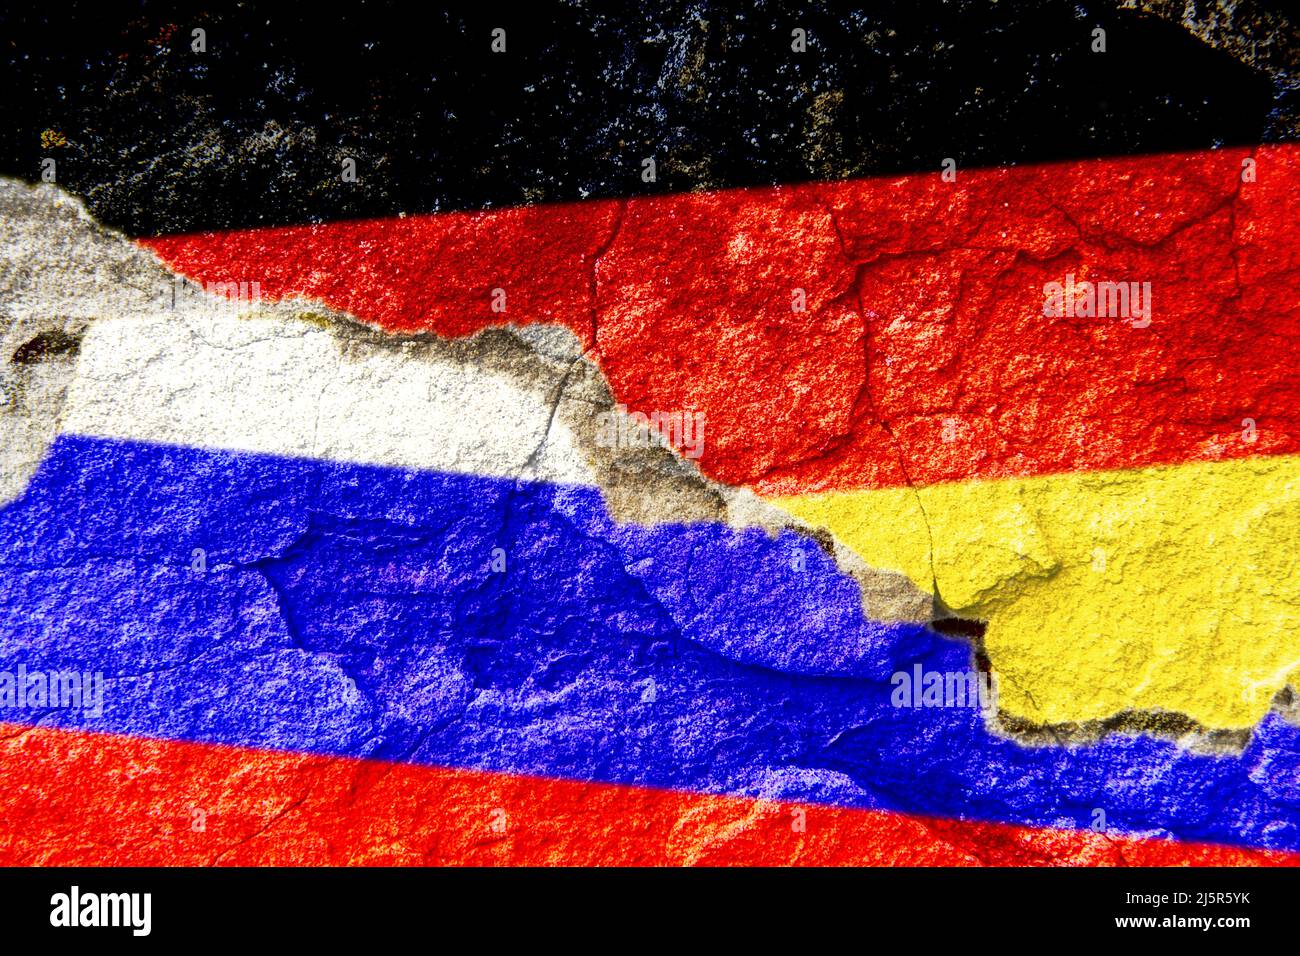 Flags Of Germany And Russia On Broken Ground Stock Photo